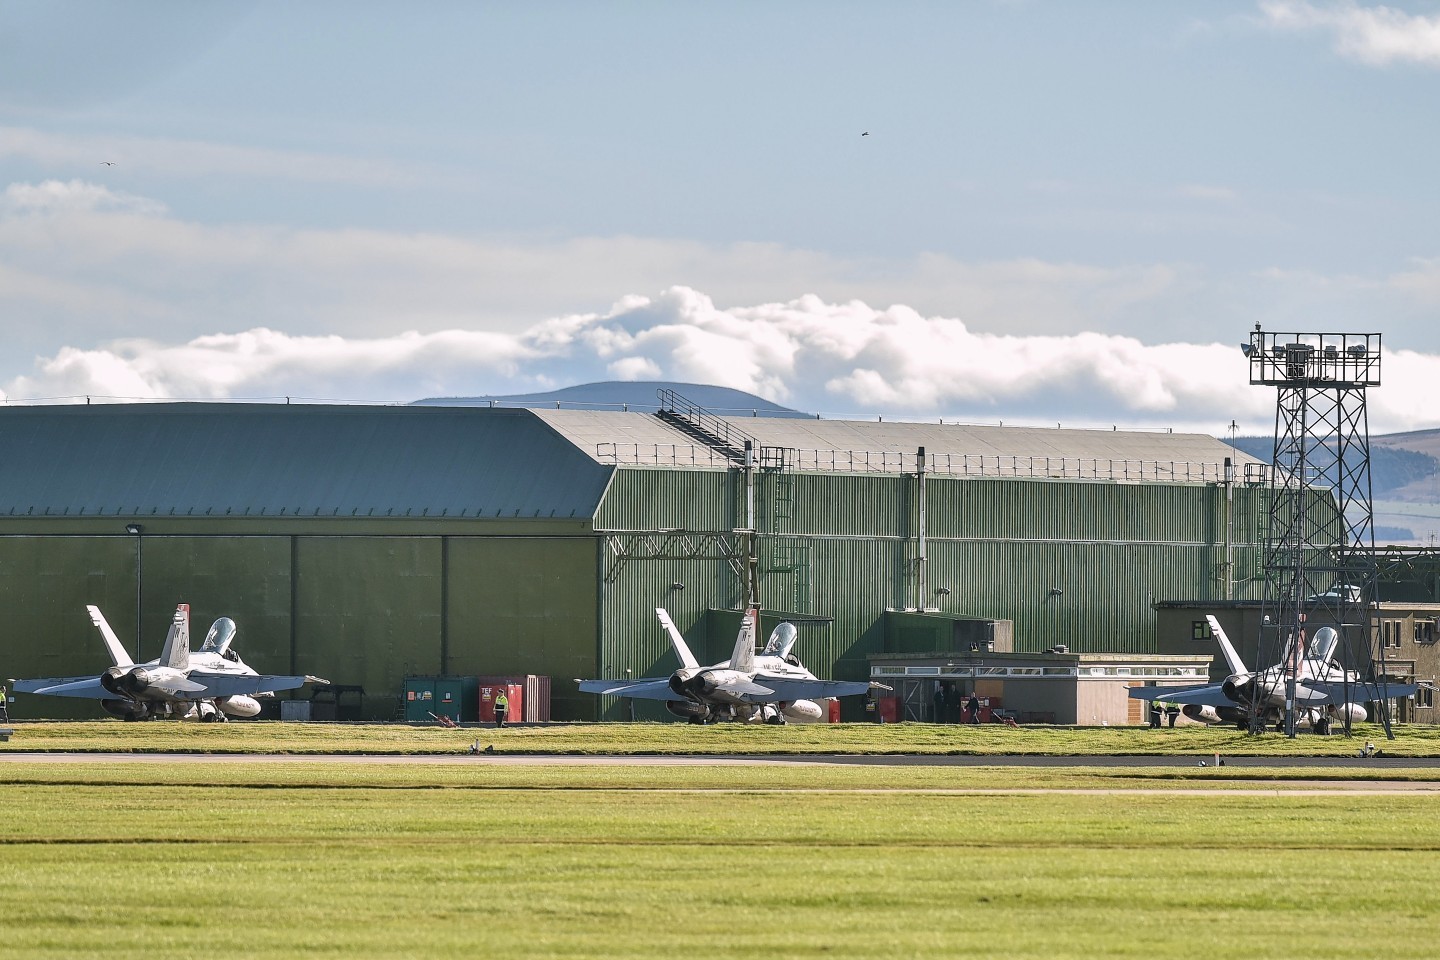 US pilots arrive in Lossiemouth after one of their colleagues died in a crash in England